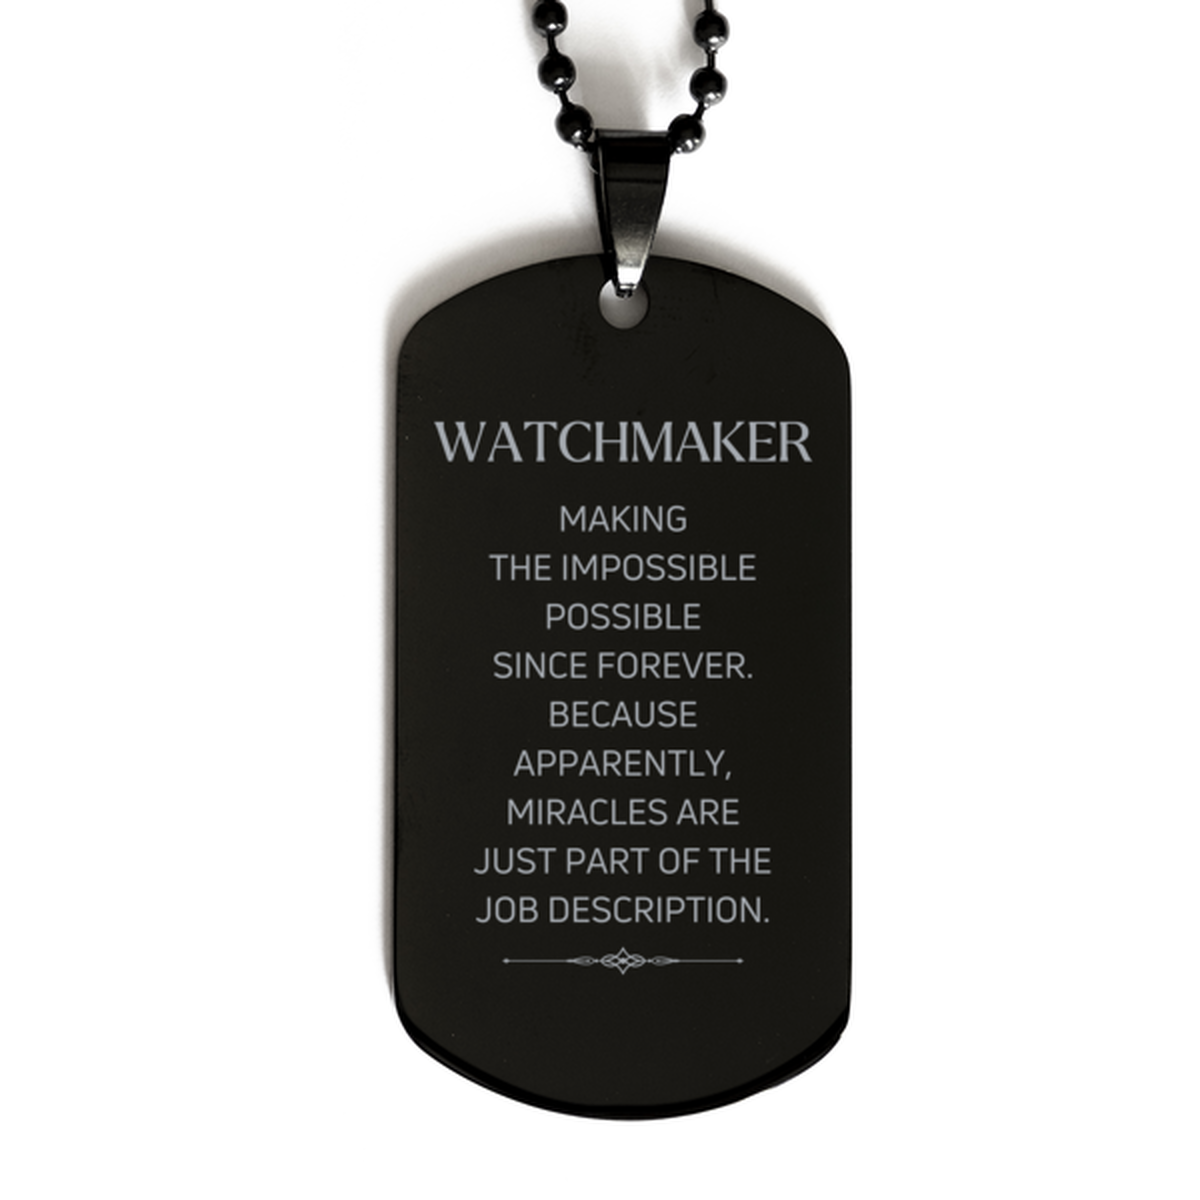 Funny Watchmaker Gifts, Miracles are just part of the job description, Inspirational Birthday Black Dog Tag For Watchmaker, Men, Women, Coworkers, Friends, Boss